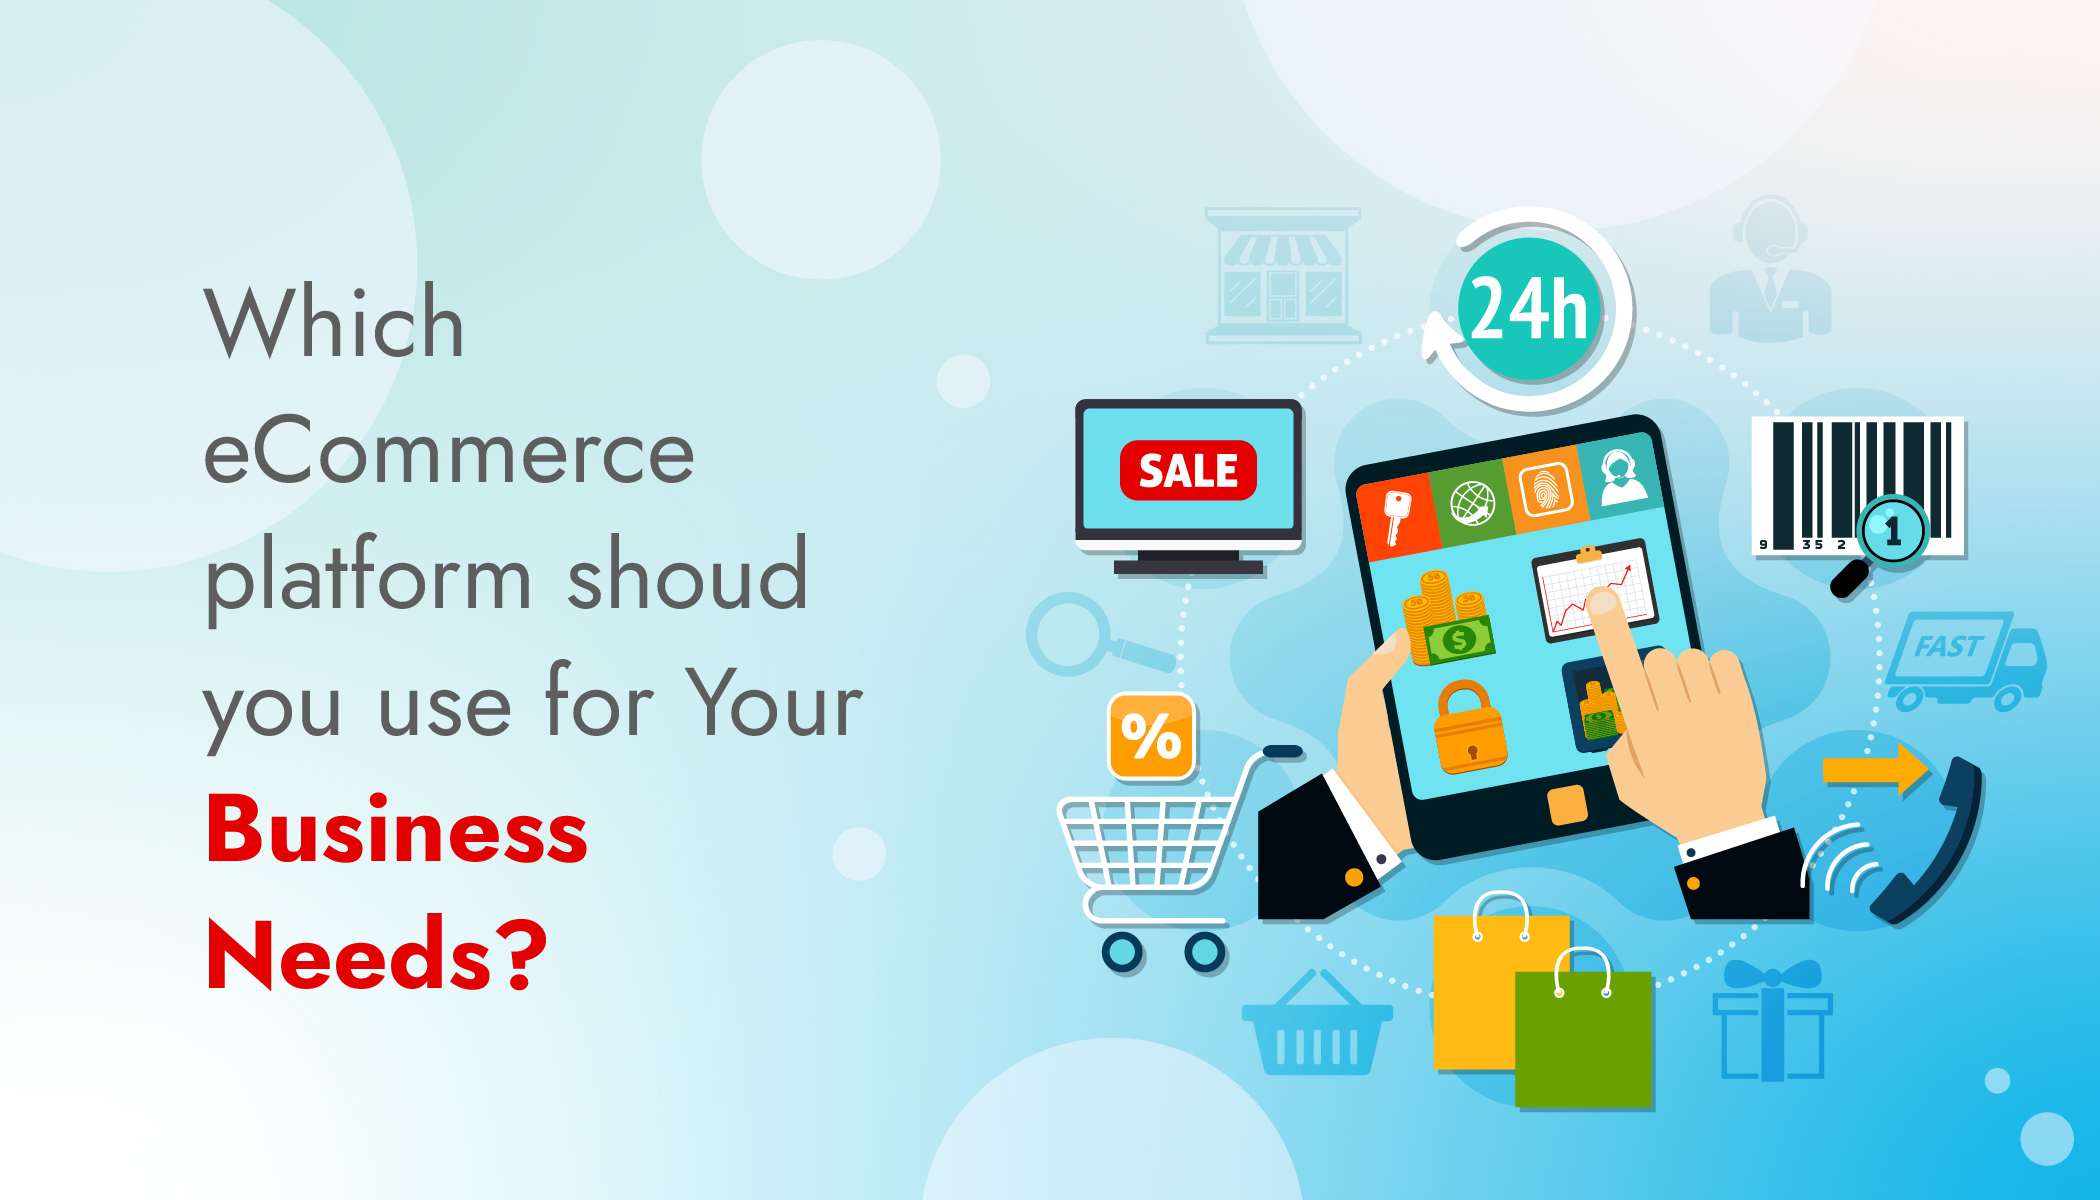 Which eCommerce platform should you use for Your Business Needs?